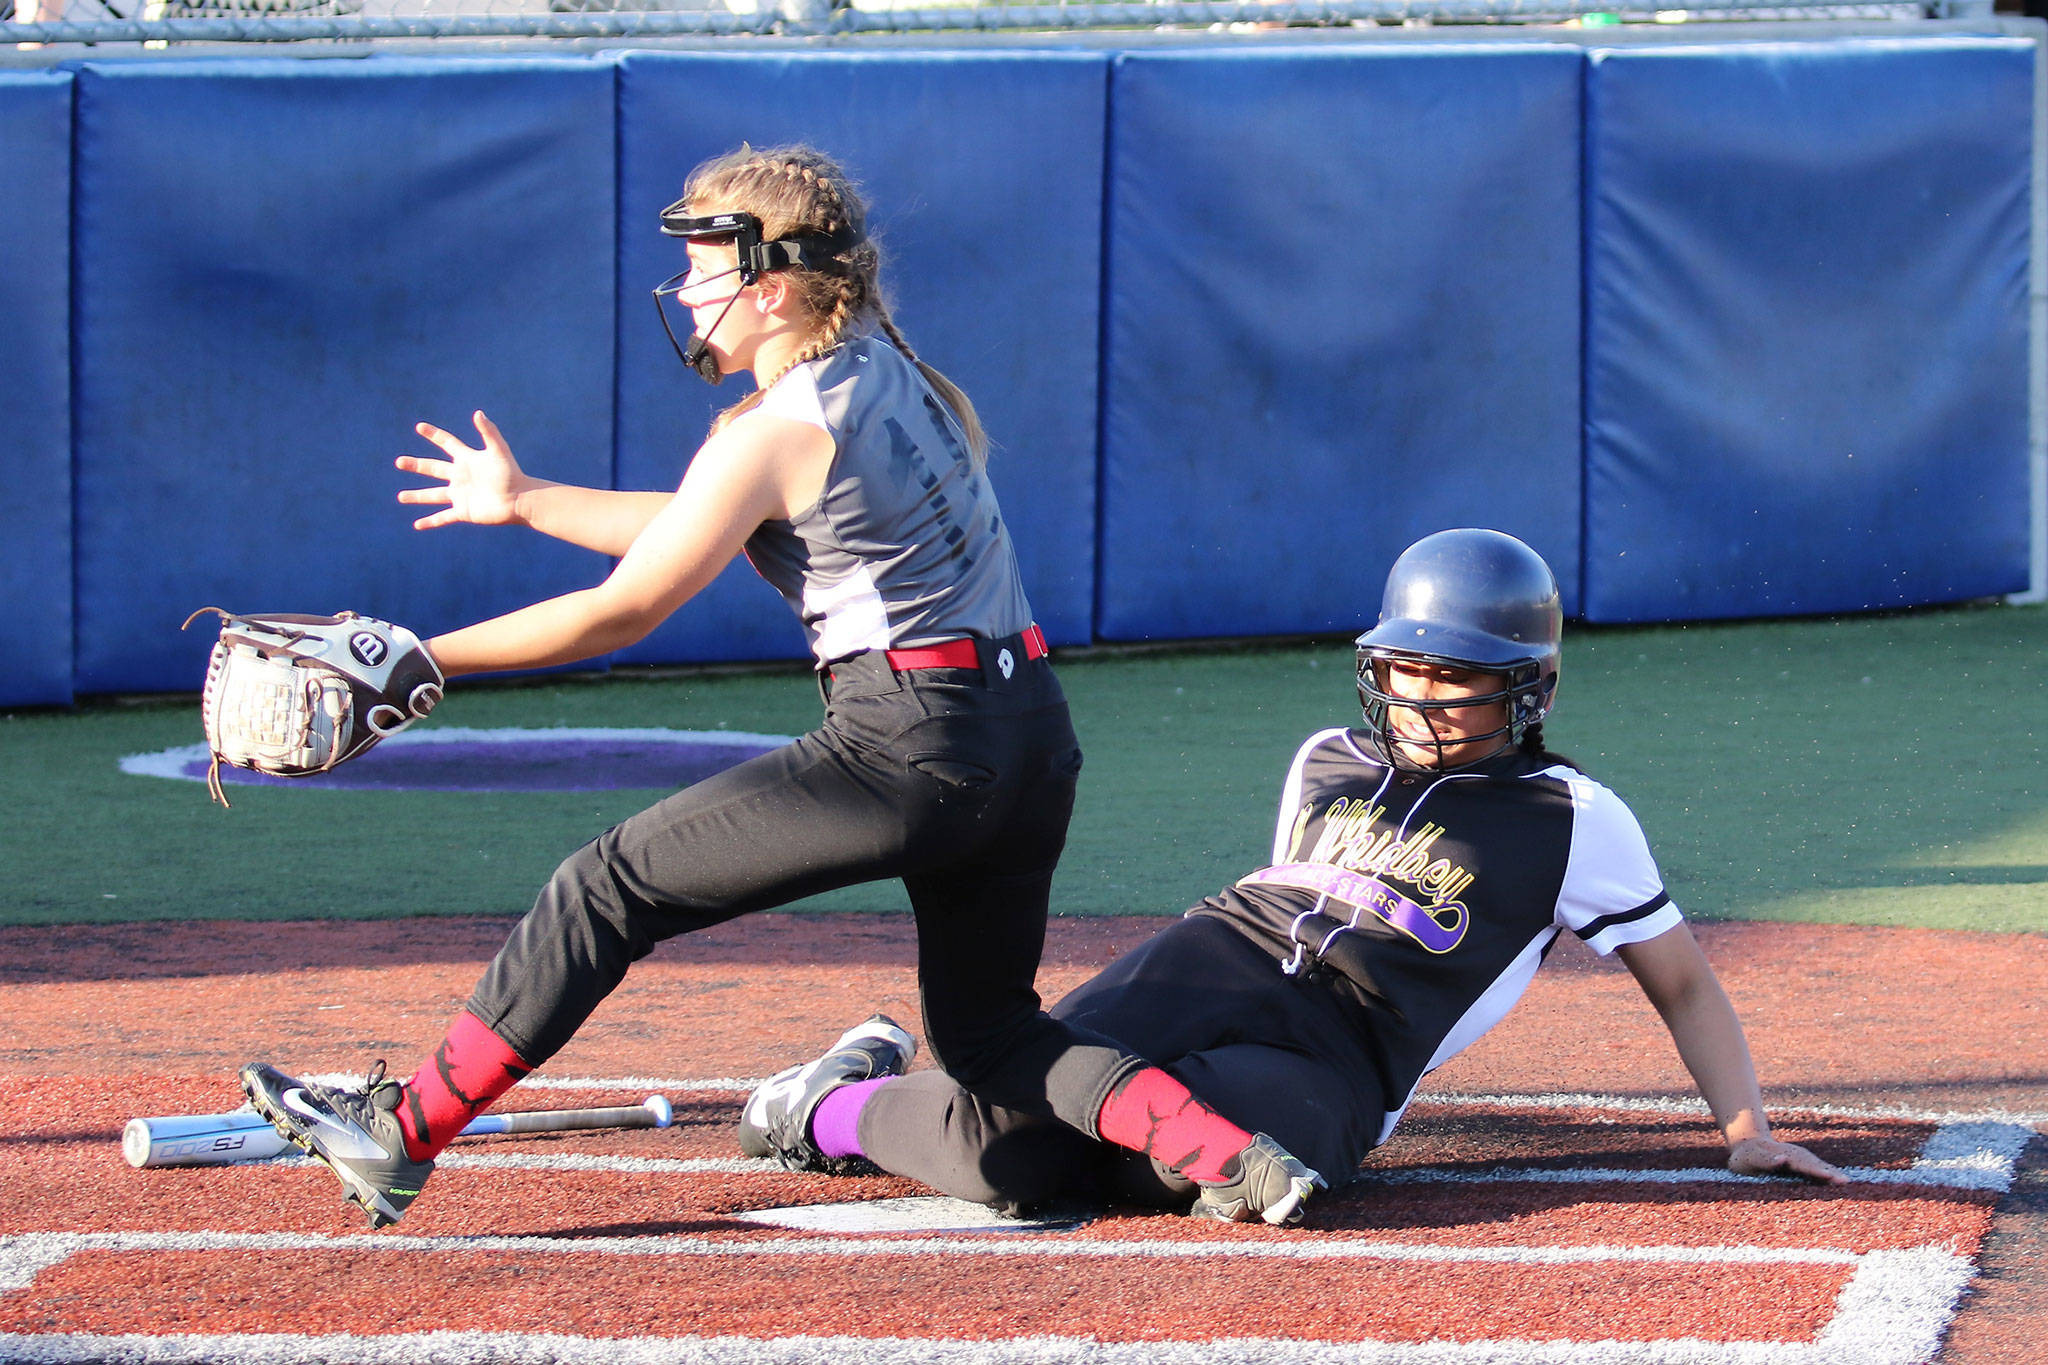 North Whidbey’s Loto Tupu slides safely into home while Central Whidbey’s Chloe Marzocca waits for the throw. (Photo by John Fisken)